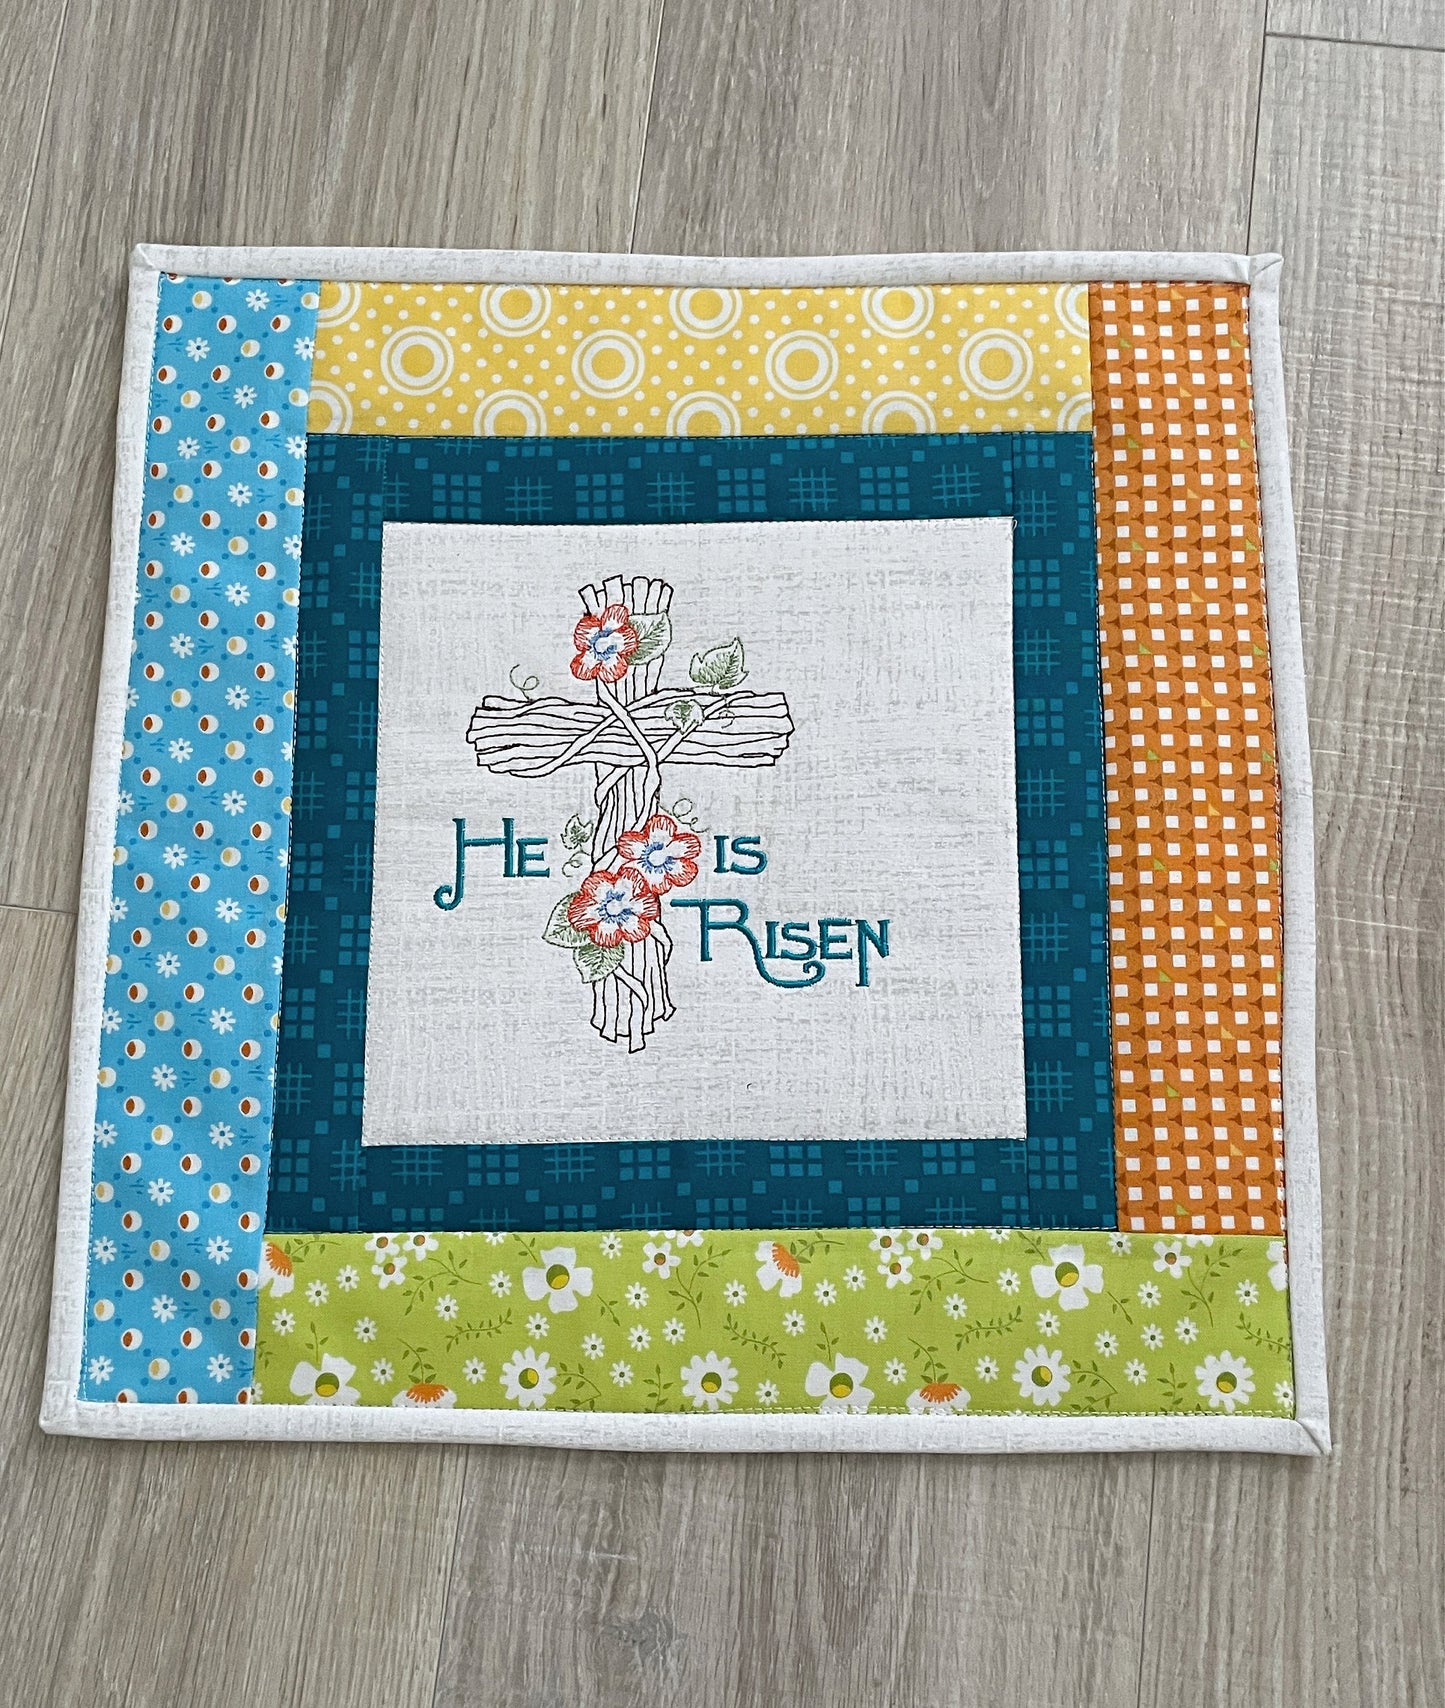 Handmade Mini Quilt with Embroidery, Easter Decor